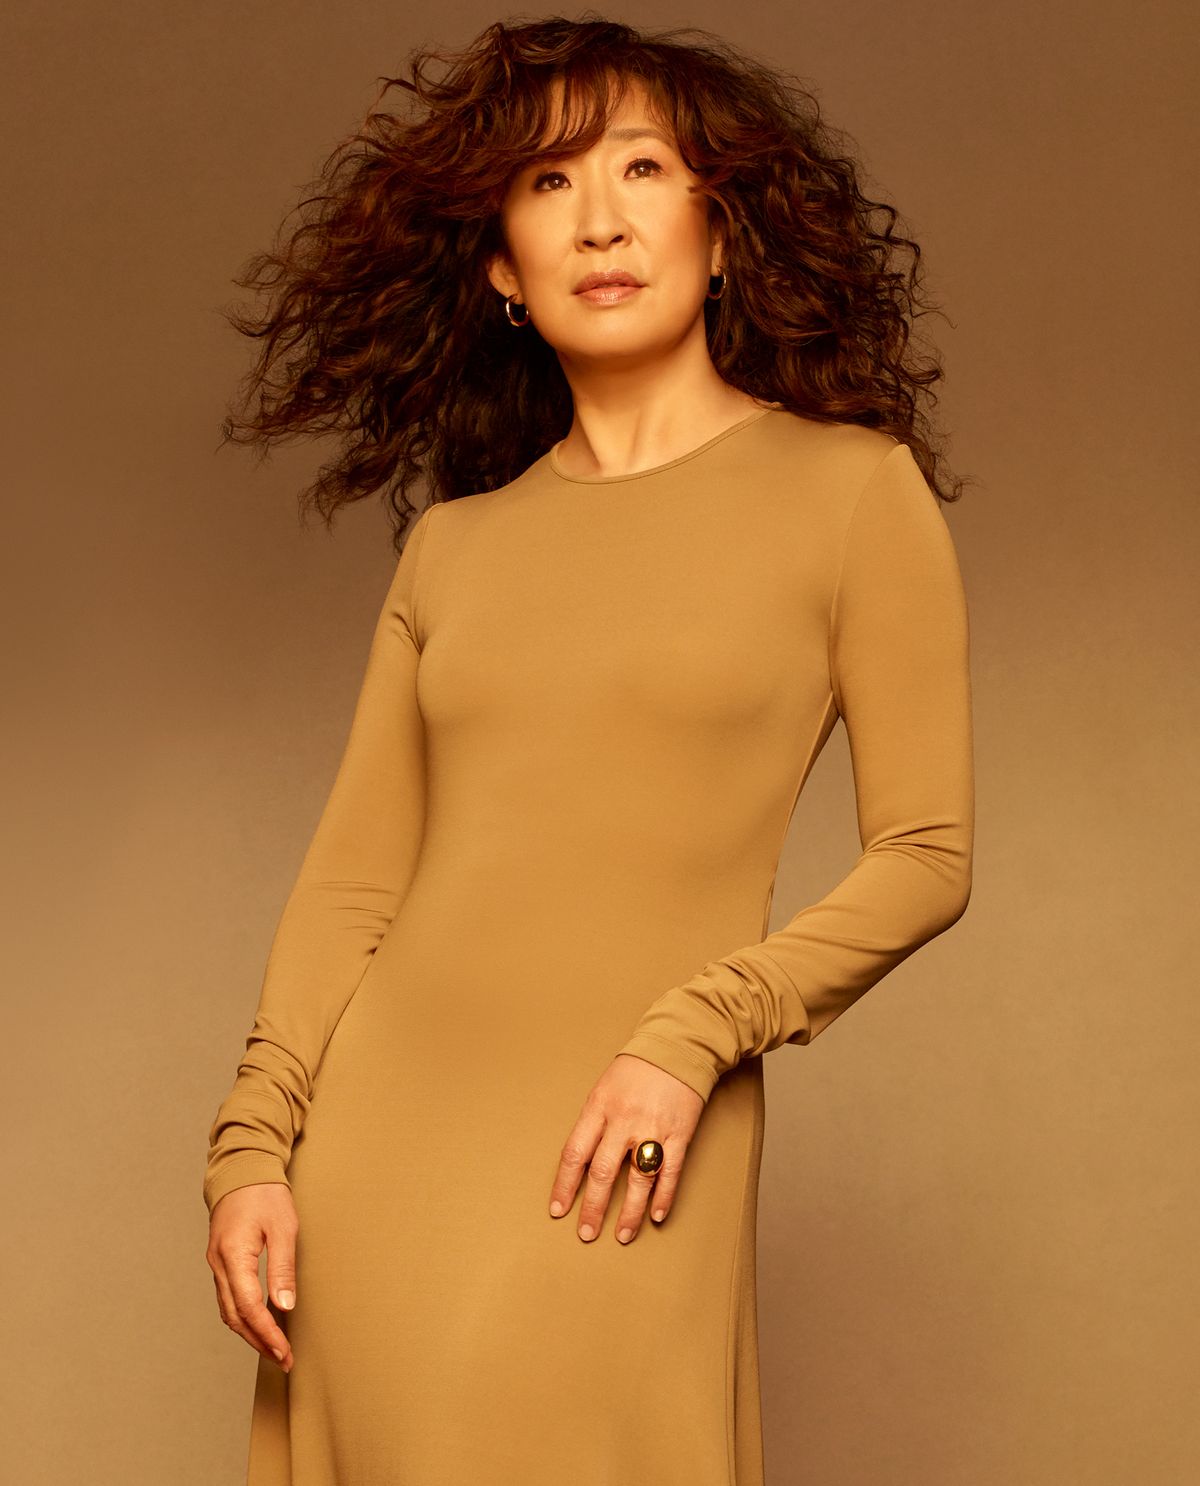 Beautyful Mom Firse Xxx Vedeos - Sandra Oh Is Agitating for Real, Culture-Changing Inclusion